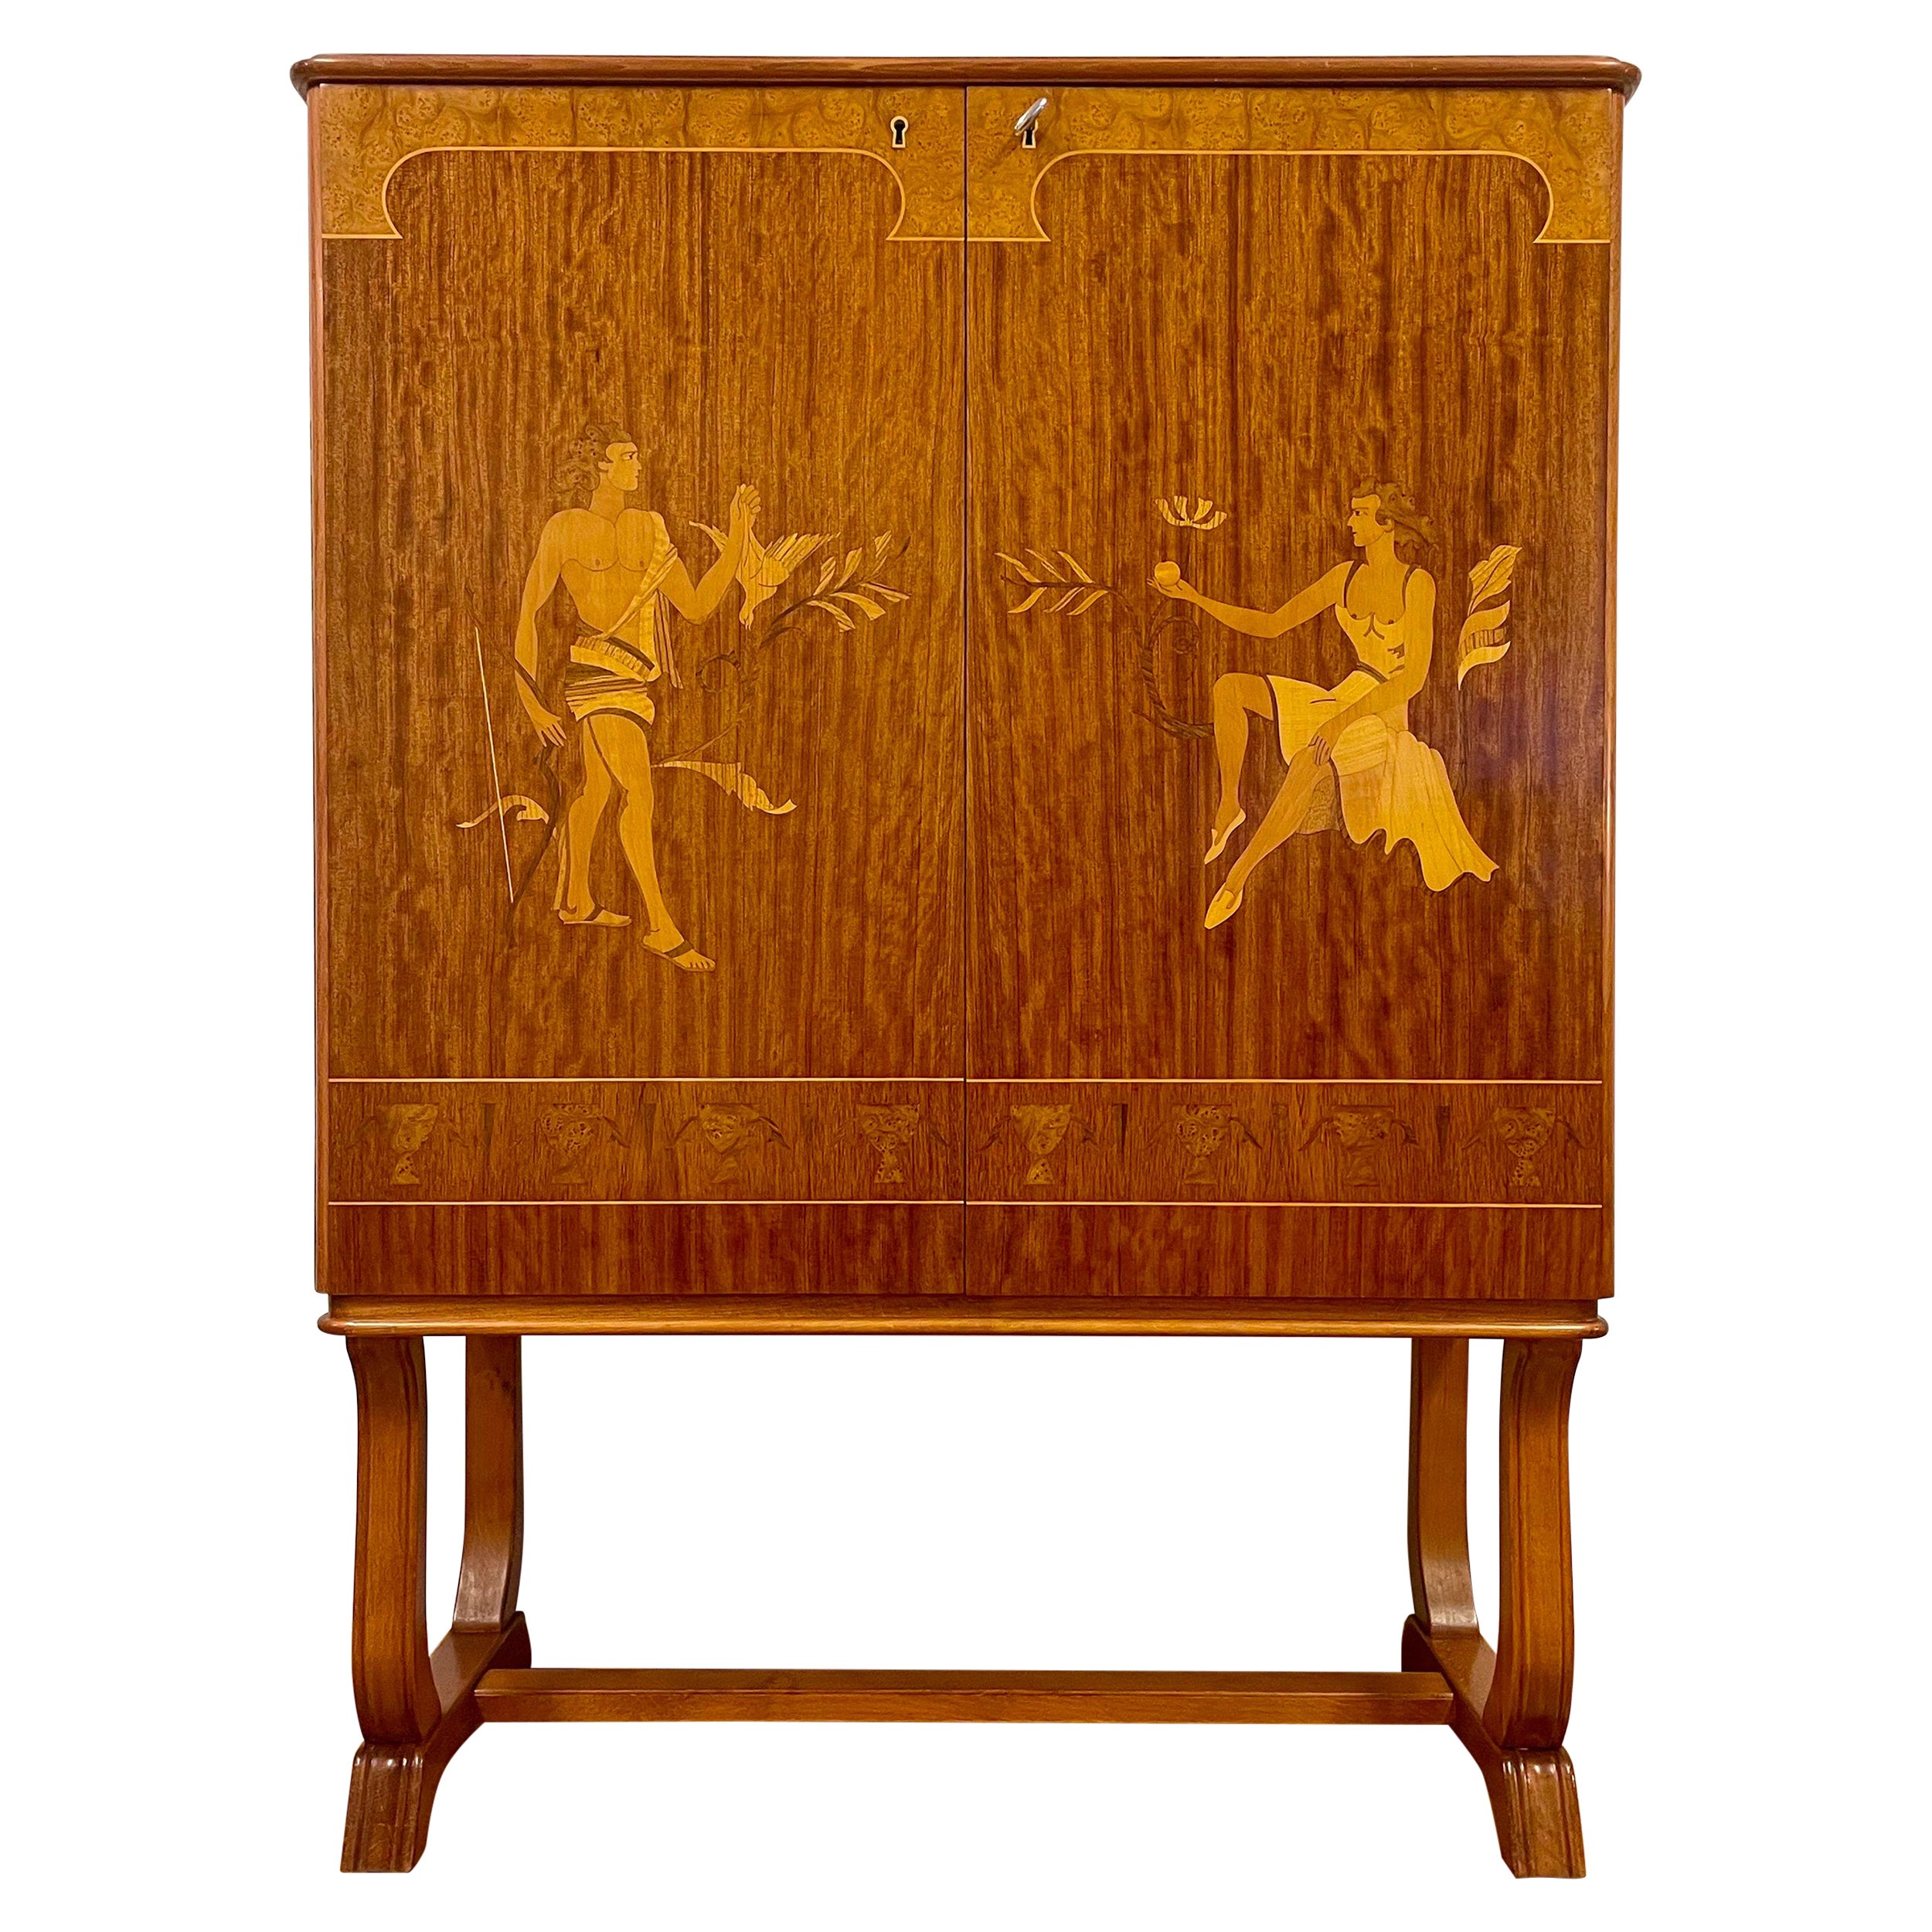 Swedish Modern 1930s Cabinet by Vingåkers Möbelfabrik with Mjölby Intarsia Decor For Sale